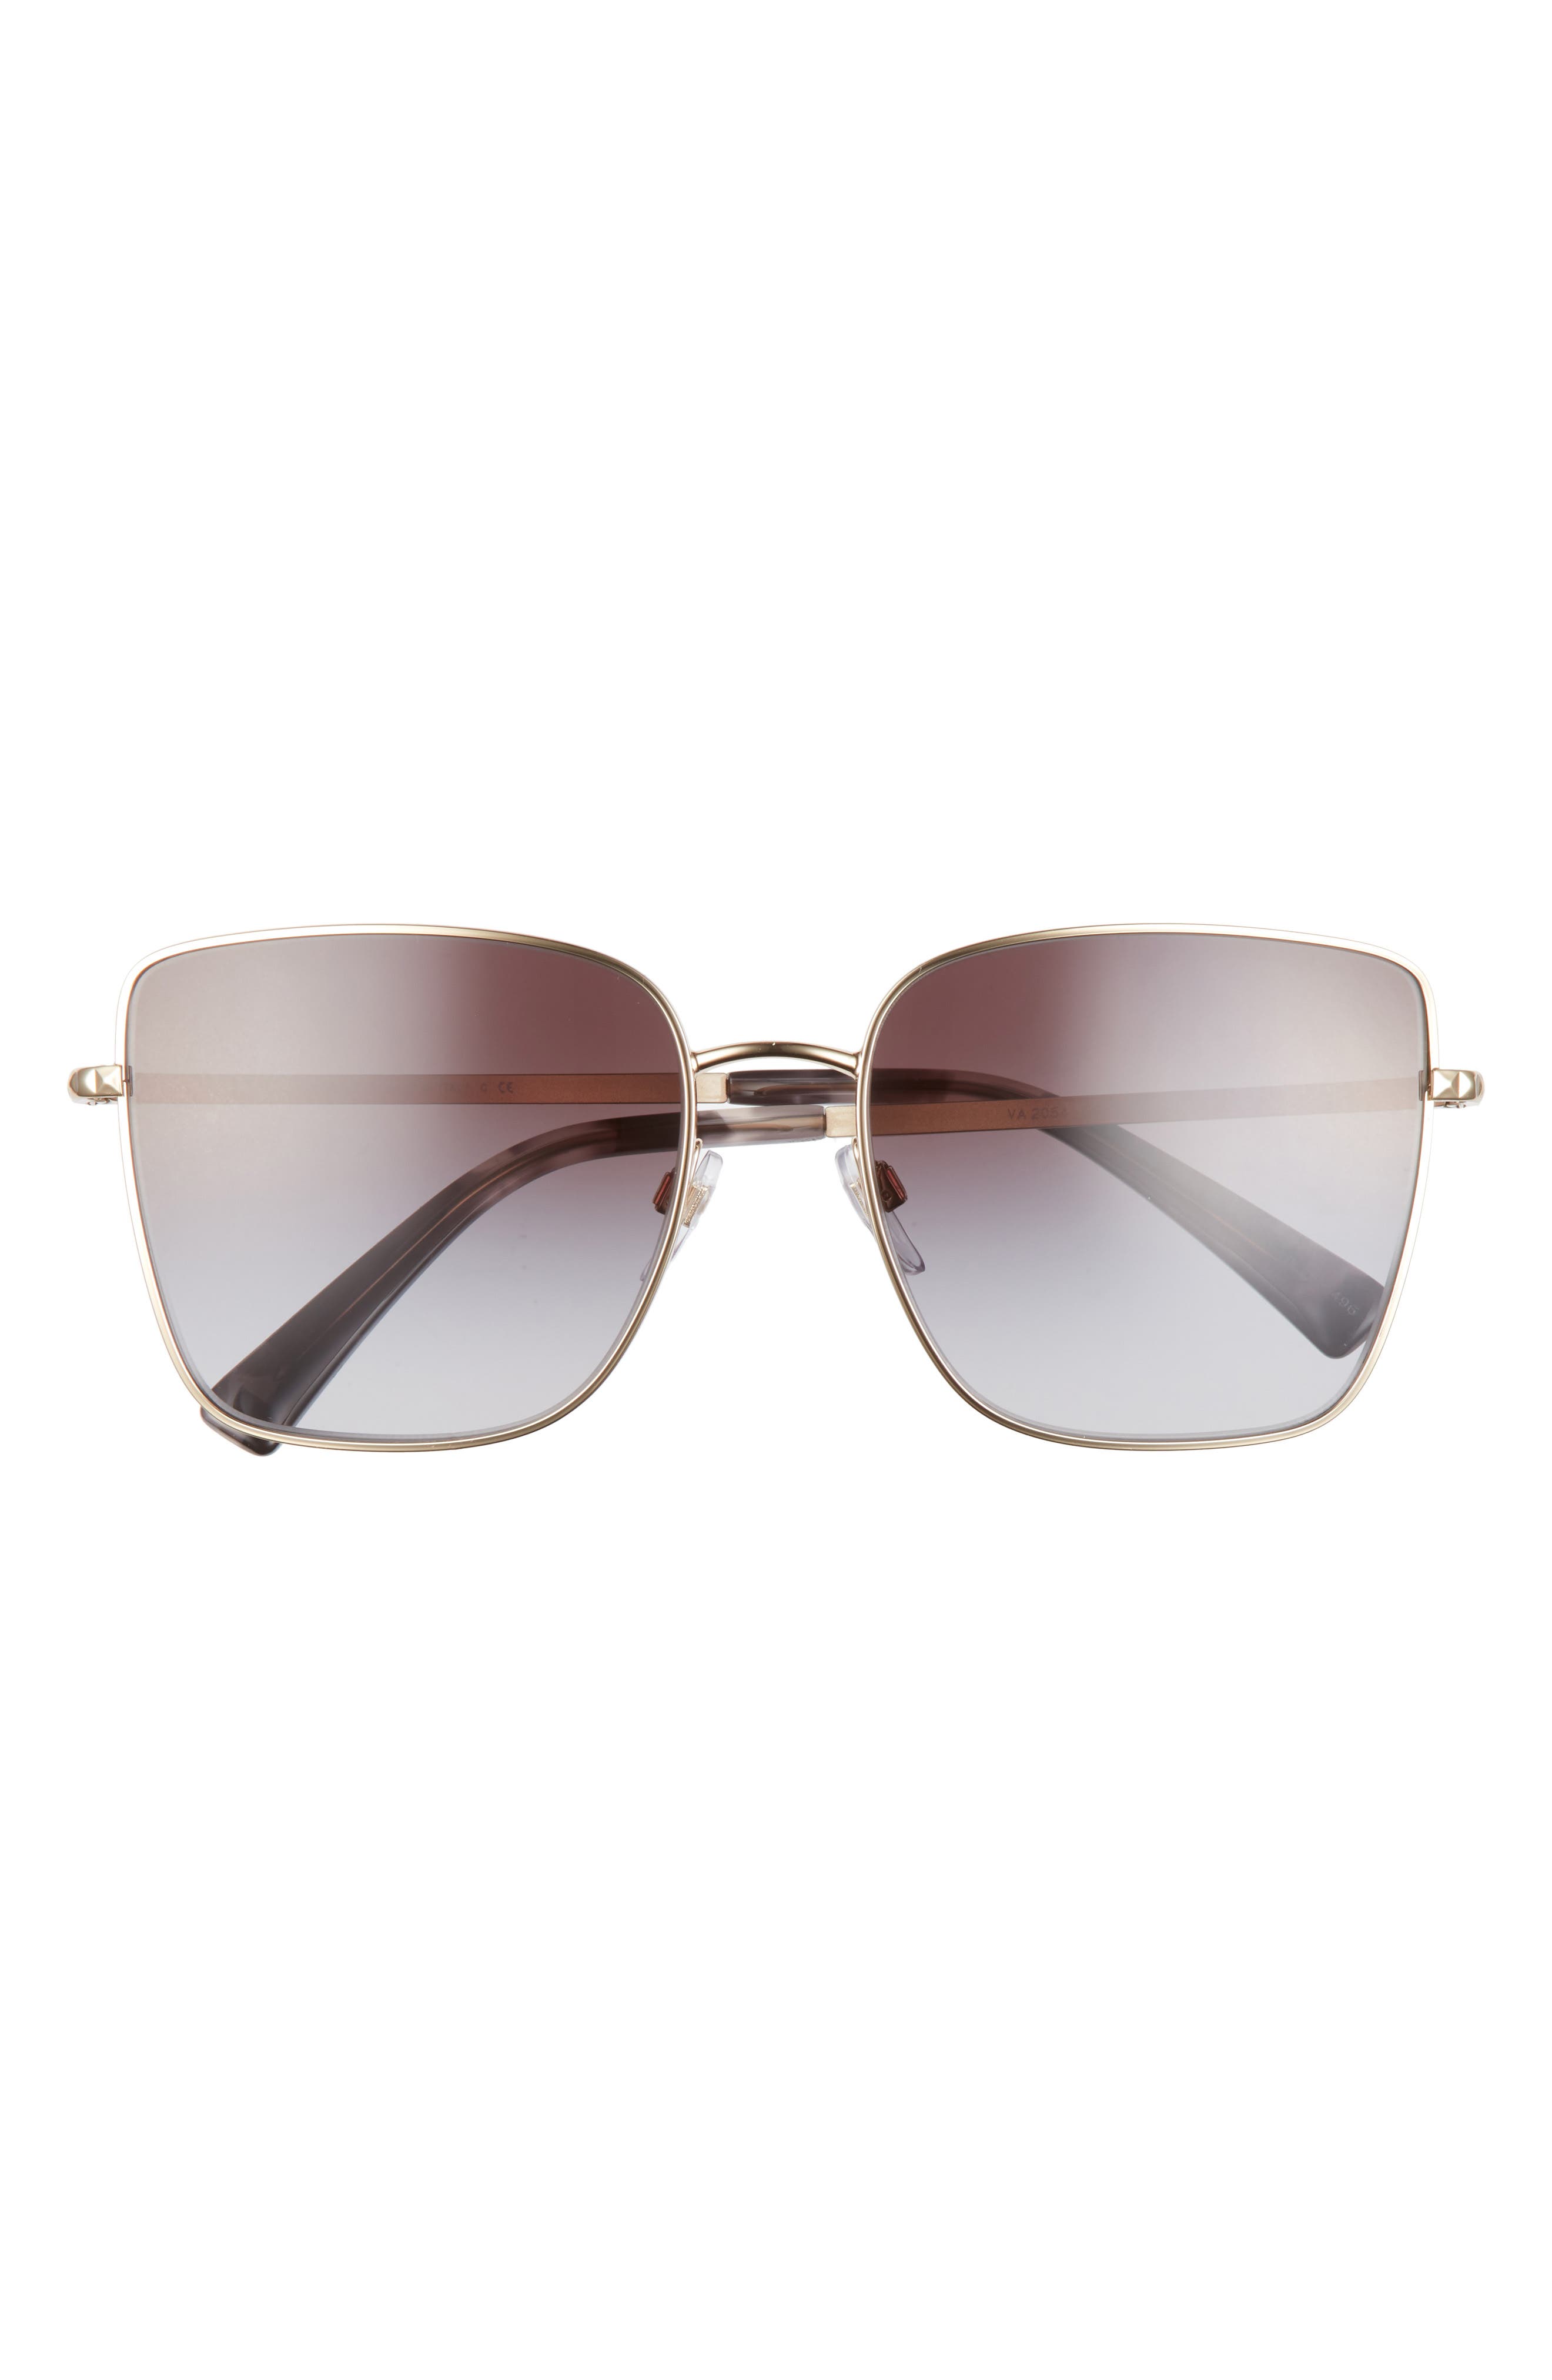 Valentino 57mm Gradient Butterfly Sunglasses in Light Gold/Grey Gradient